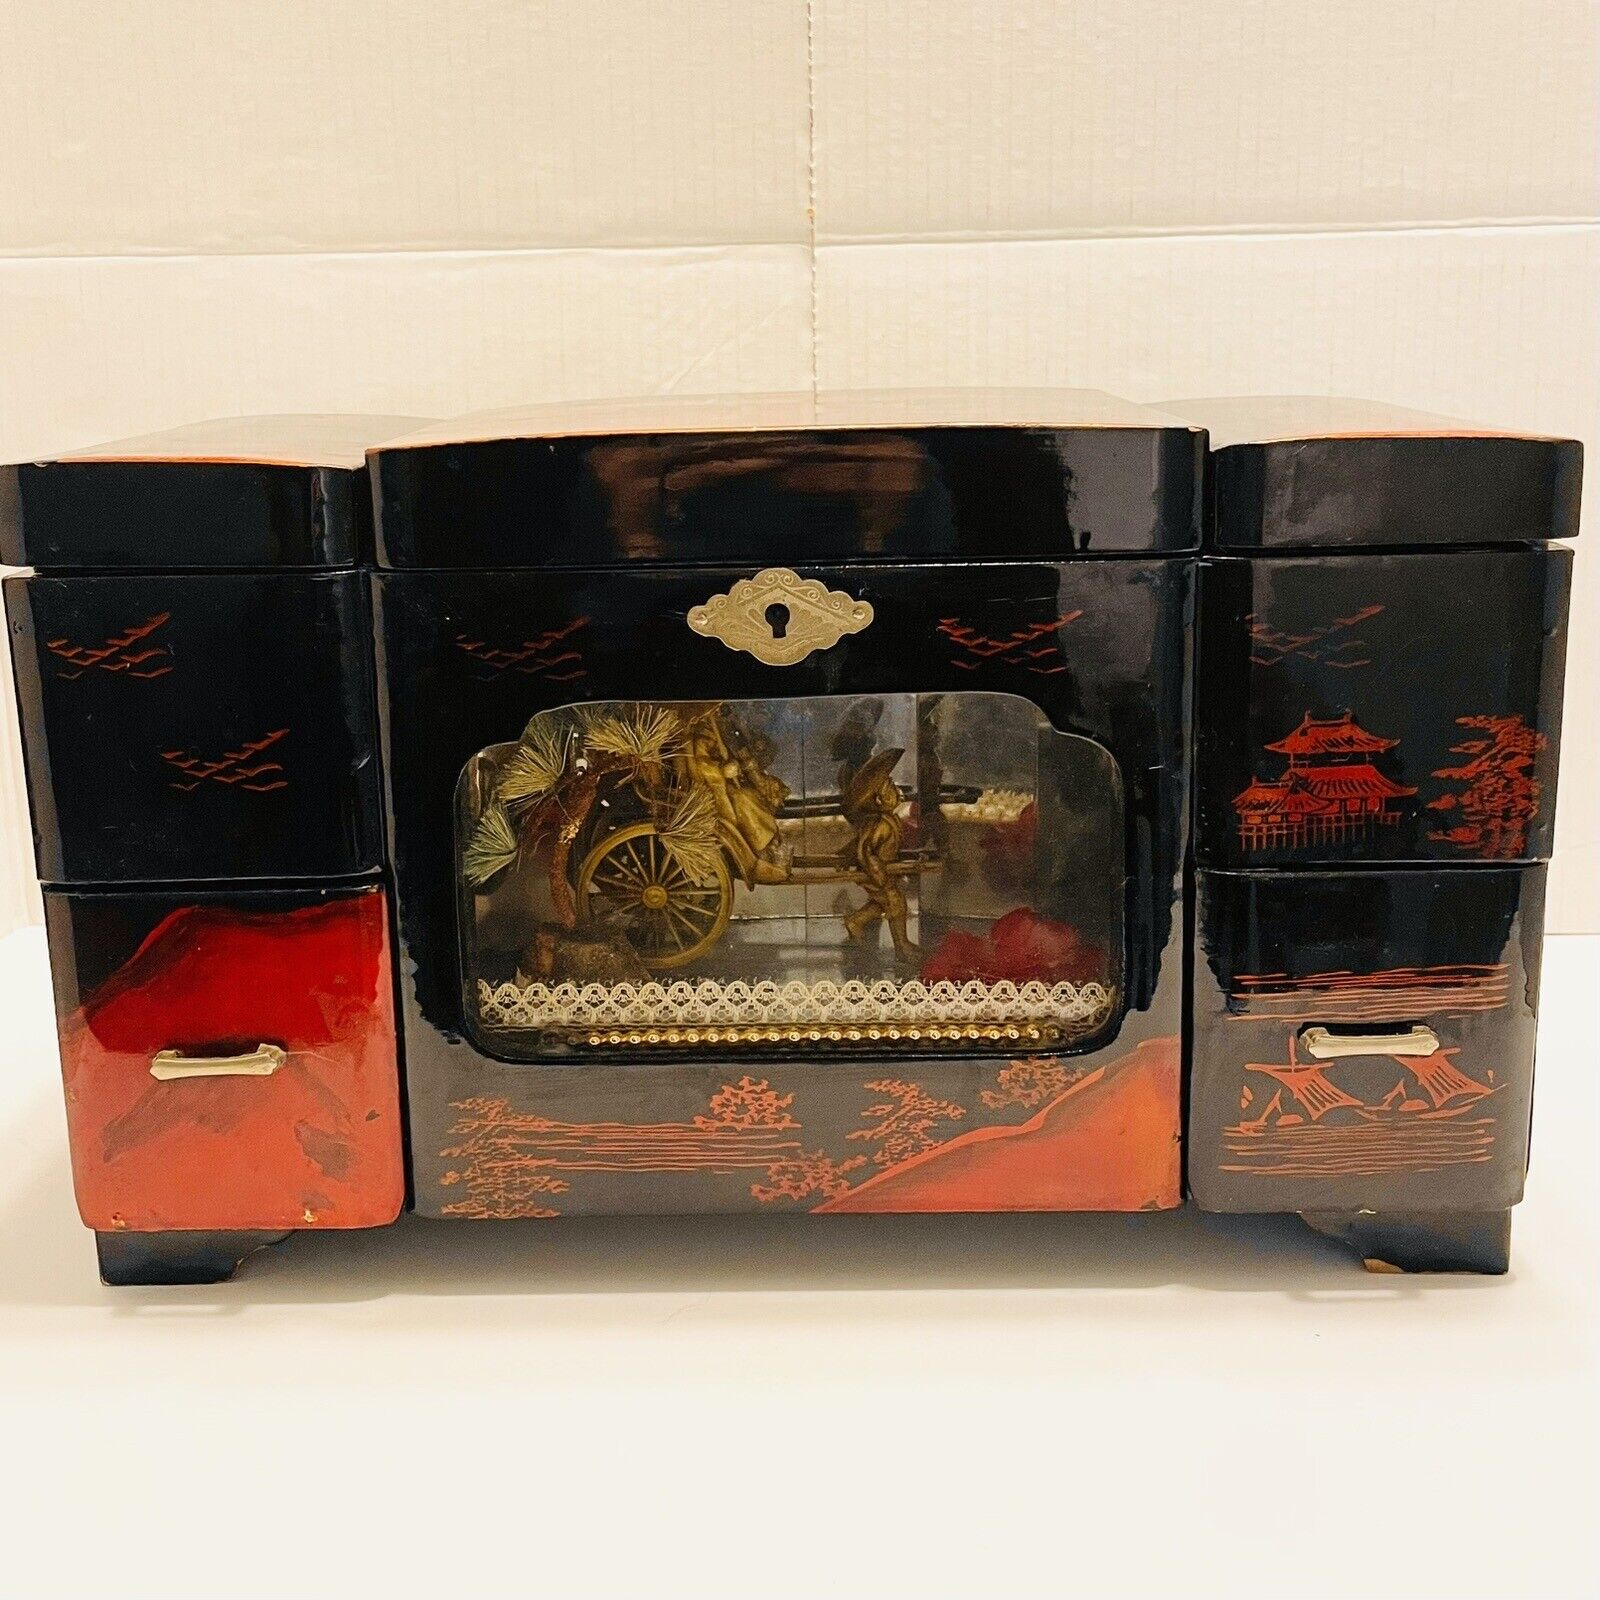 Rare vintage wind up beautiful Carriage jewelry box.